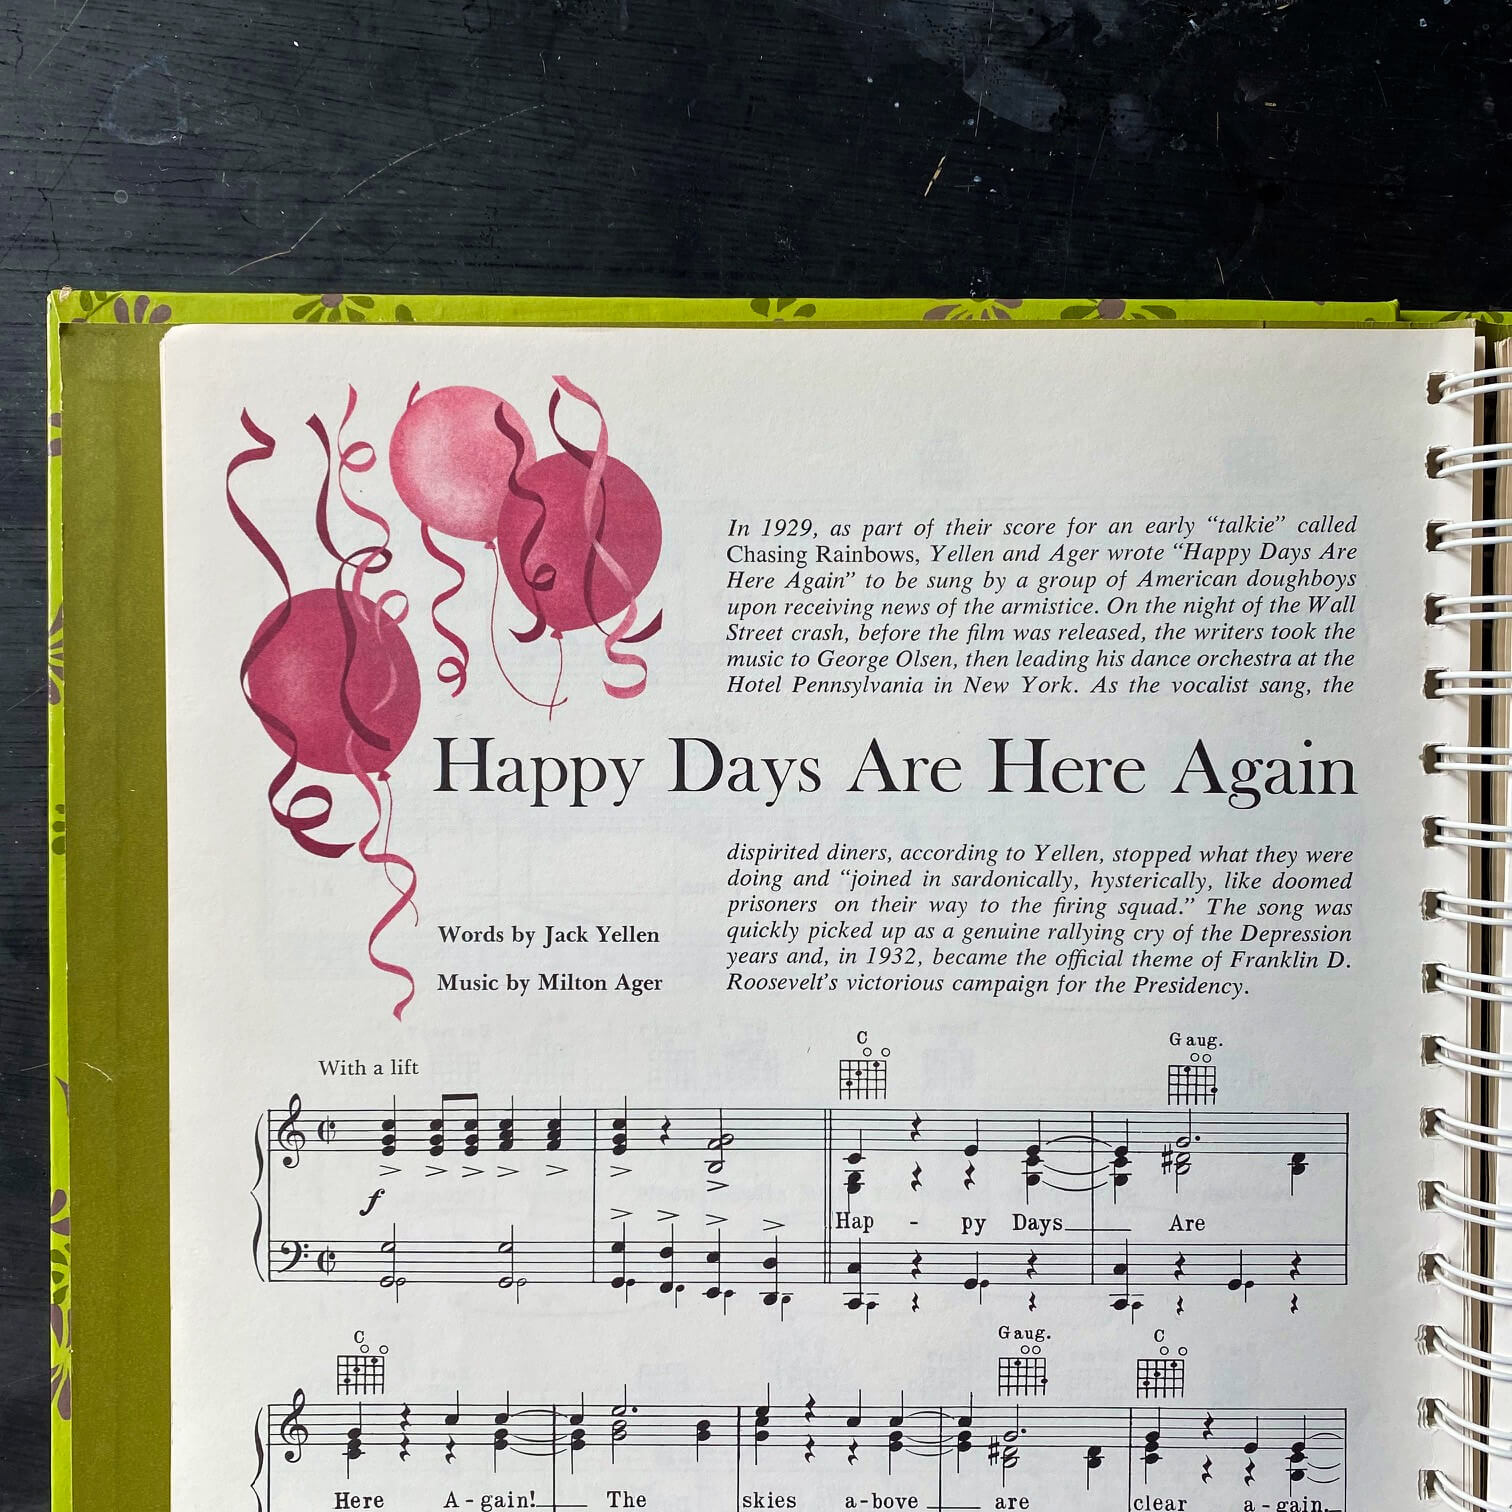 Reader's Digest Family Songbook - 1969 Edition - Sheet Music of Popular Songs From the 1920s-1960s for Piano and Voice